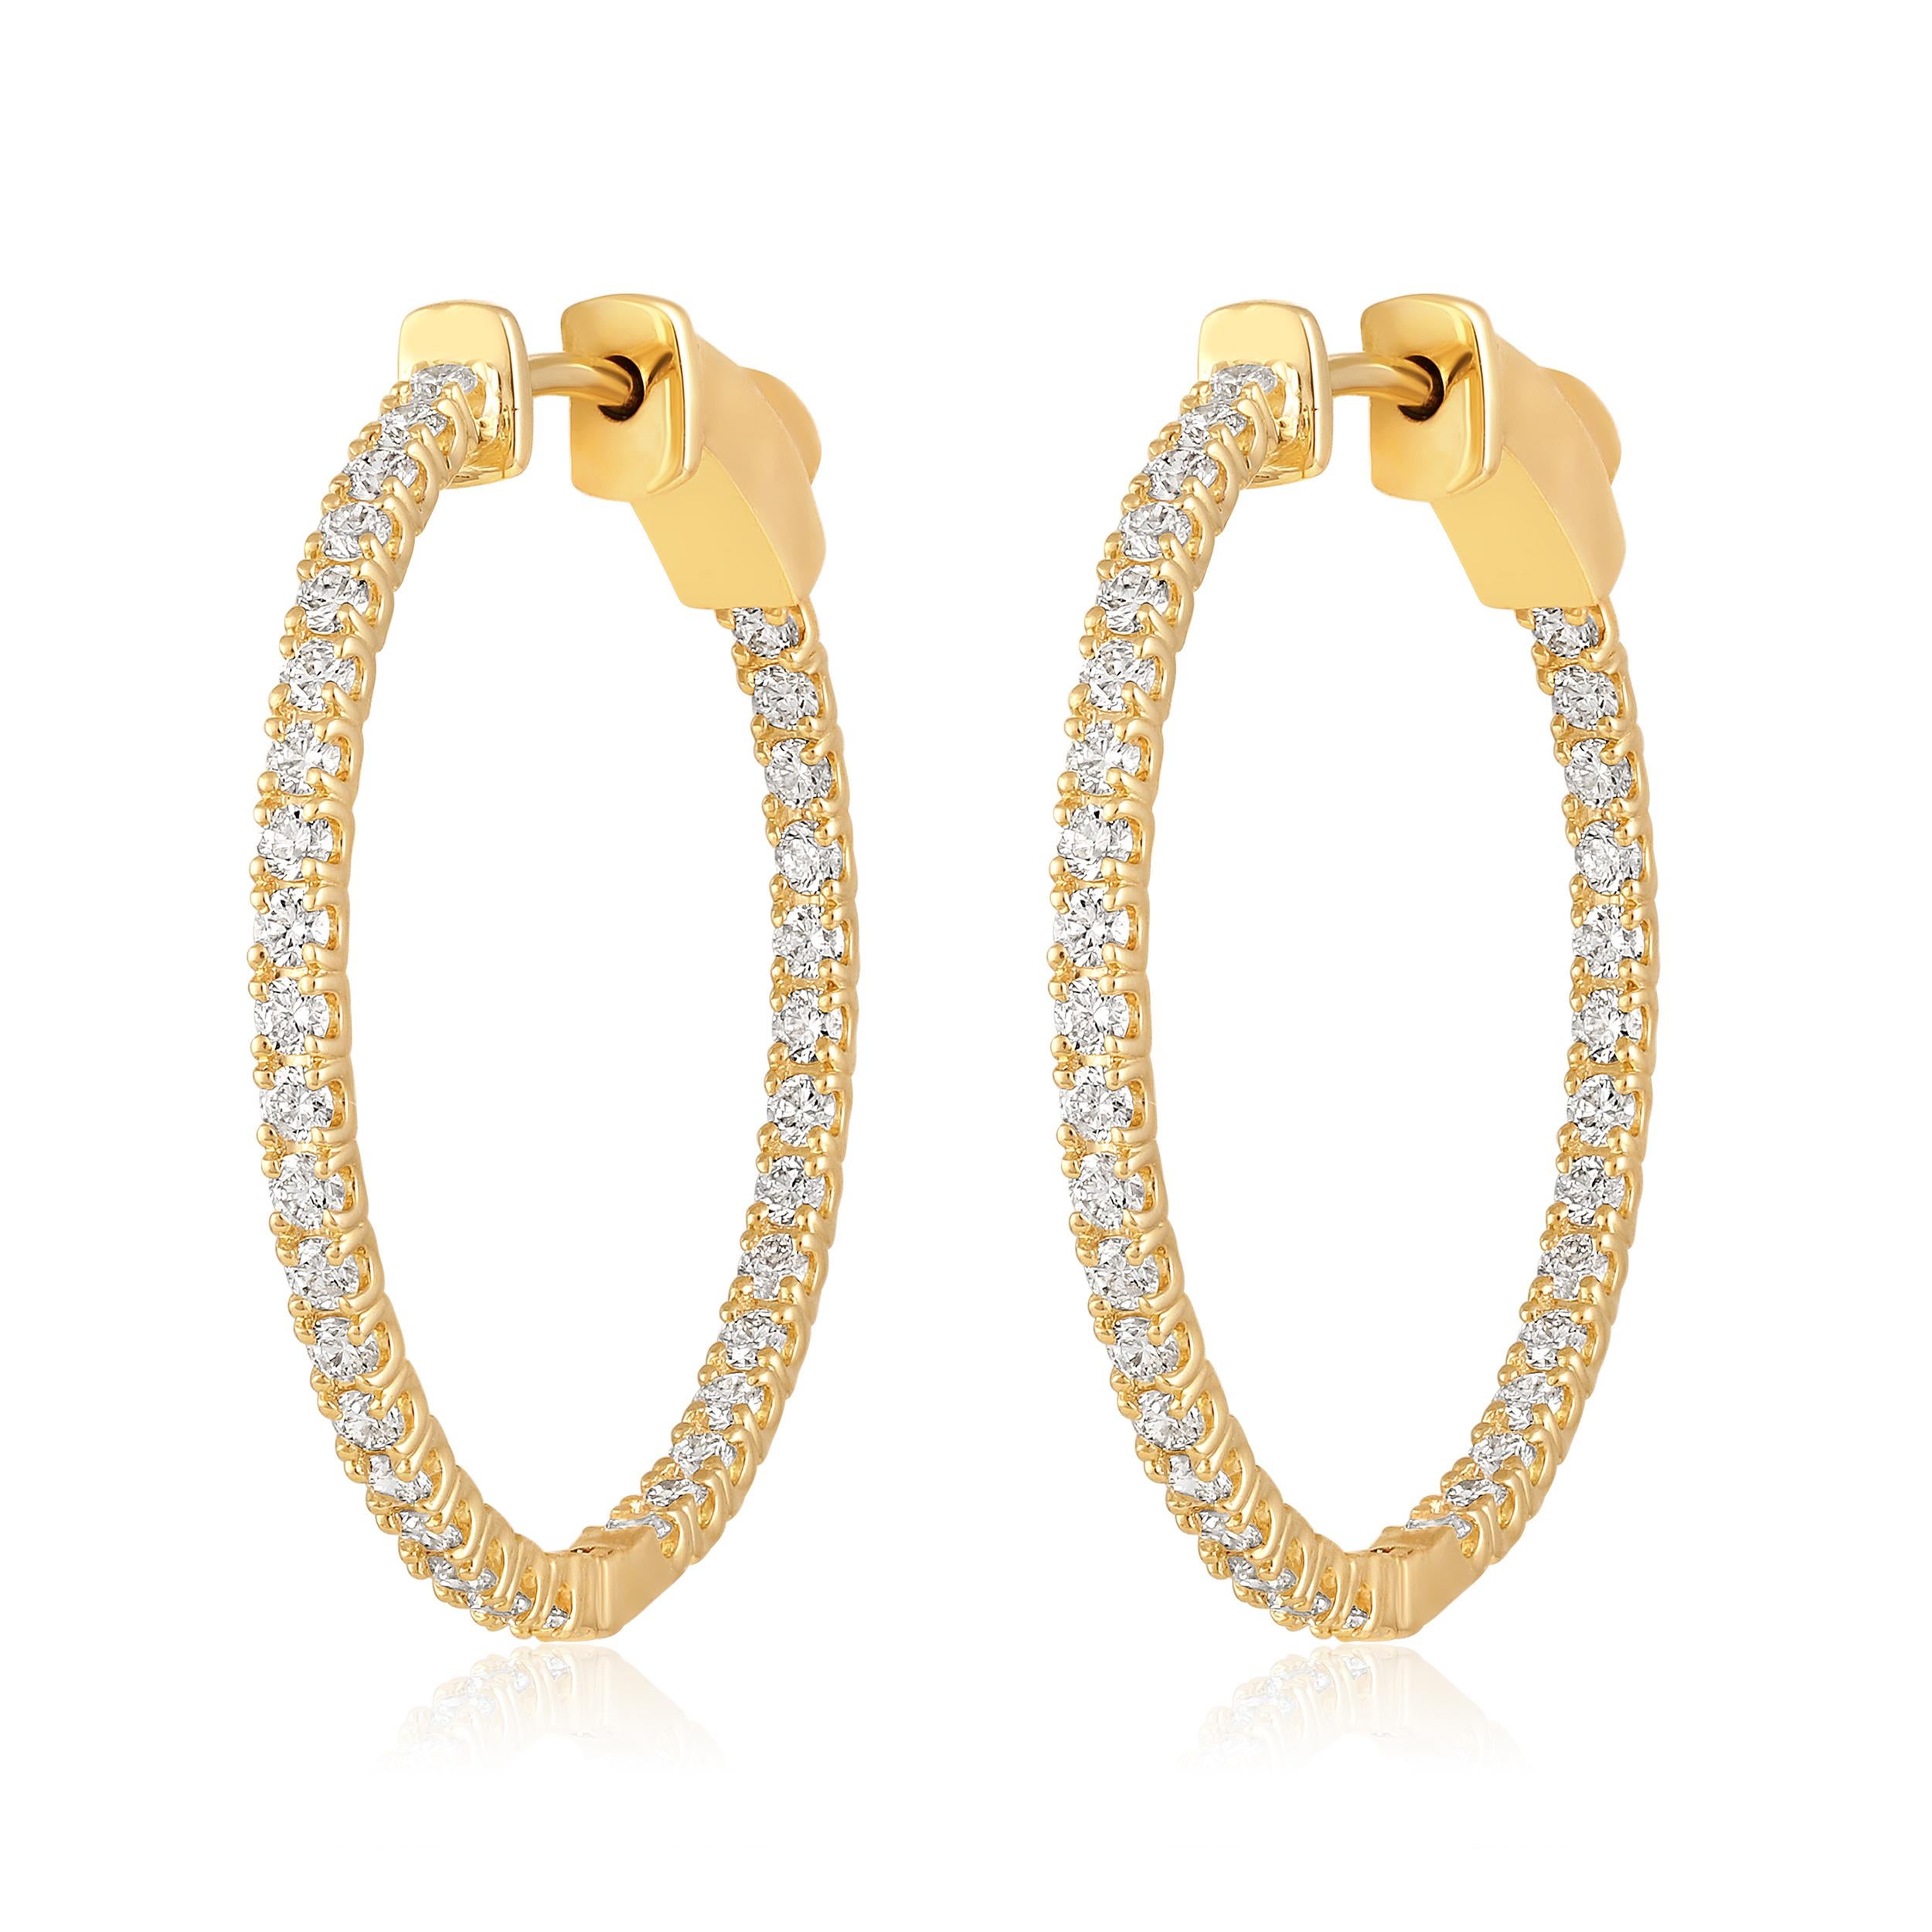 Contemporary Certified 14k Gold 1 Carat Natural Diamond Round Inside Out Hoop Earrings For Sale